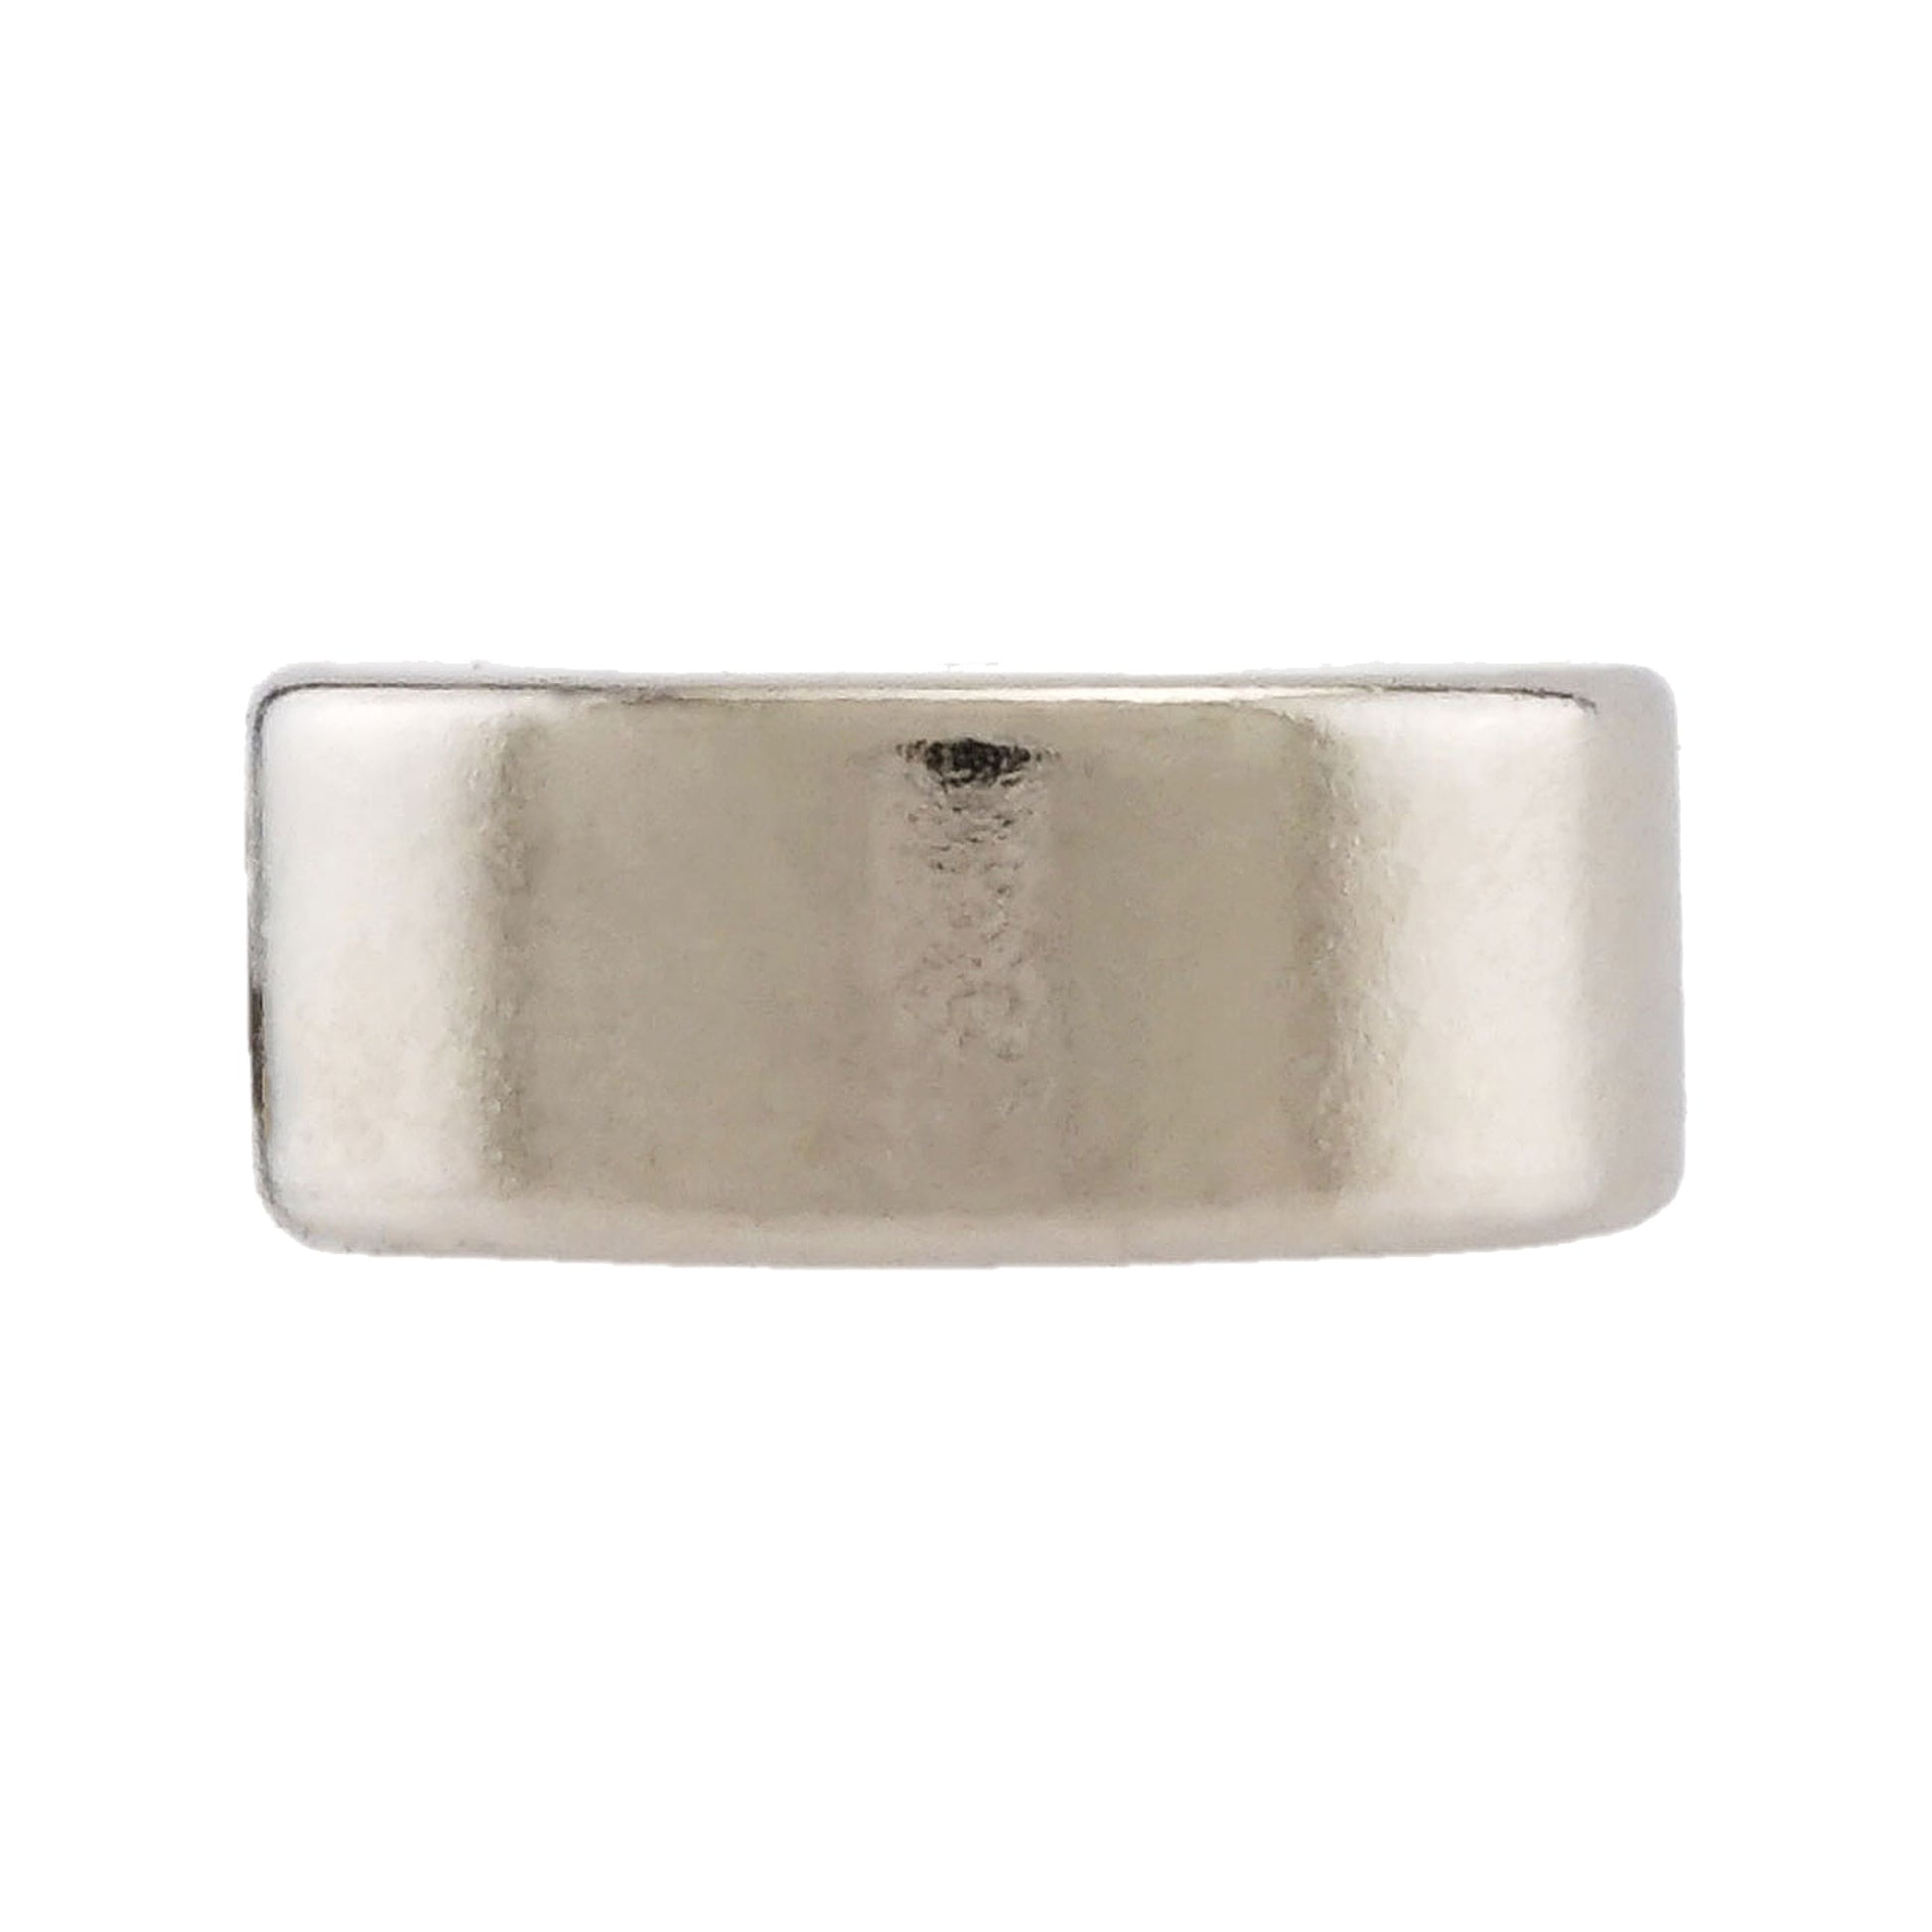 Load image into Gallery viewer, NR006206NS01 Neodymium Ring Magnet - Side View